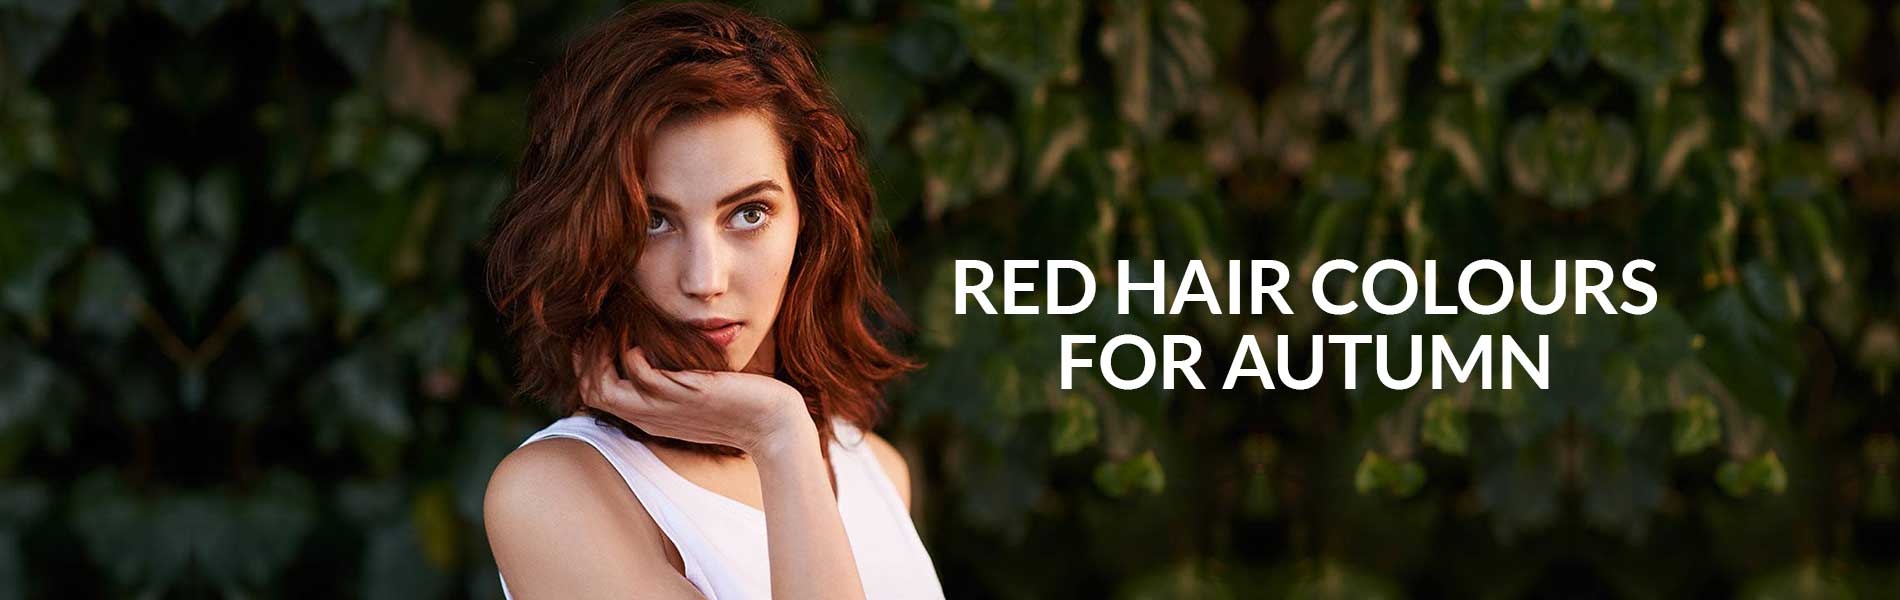 Red Hair Colours for Autumn